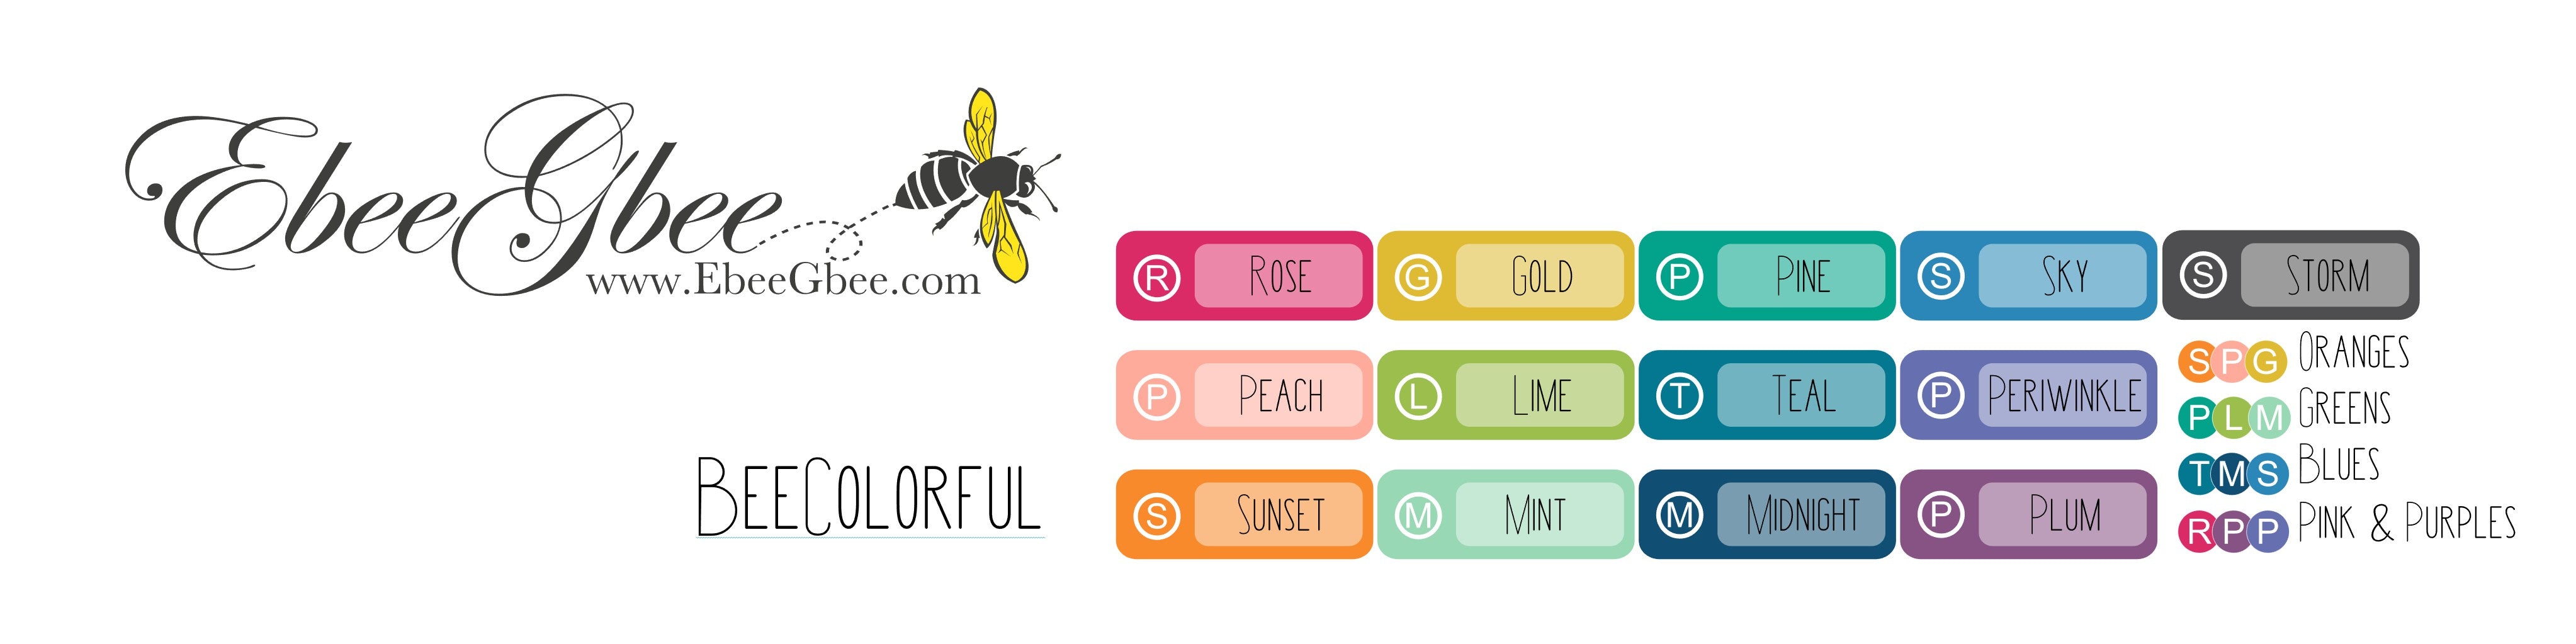 LIBRARY BOOK DUE Reminder Planner Stickers | BeeColorful